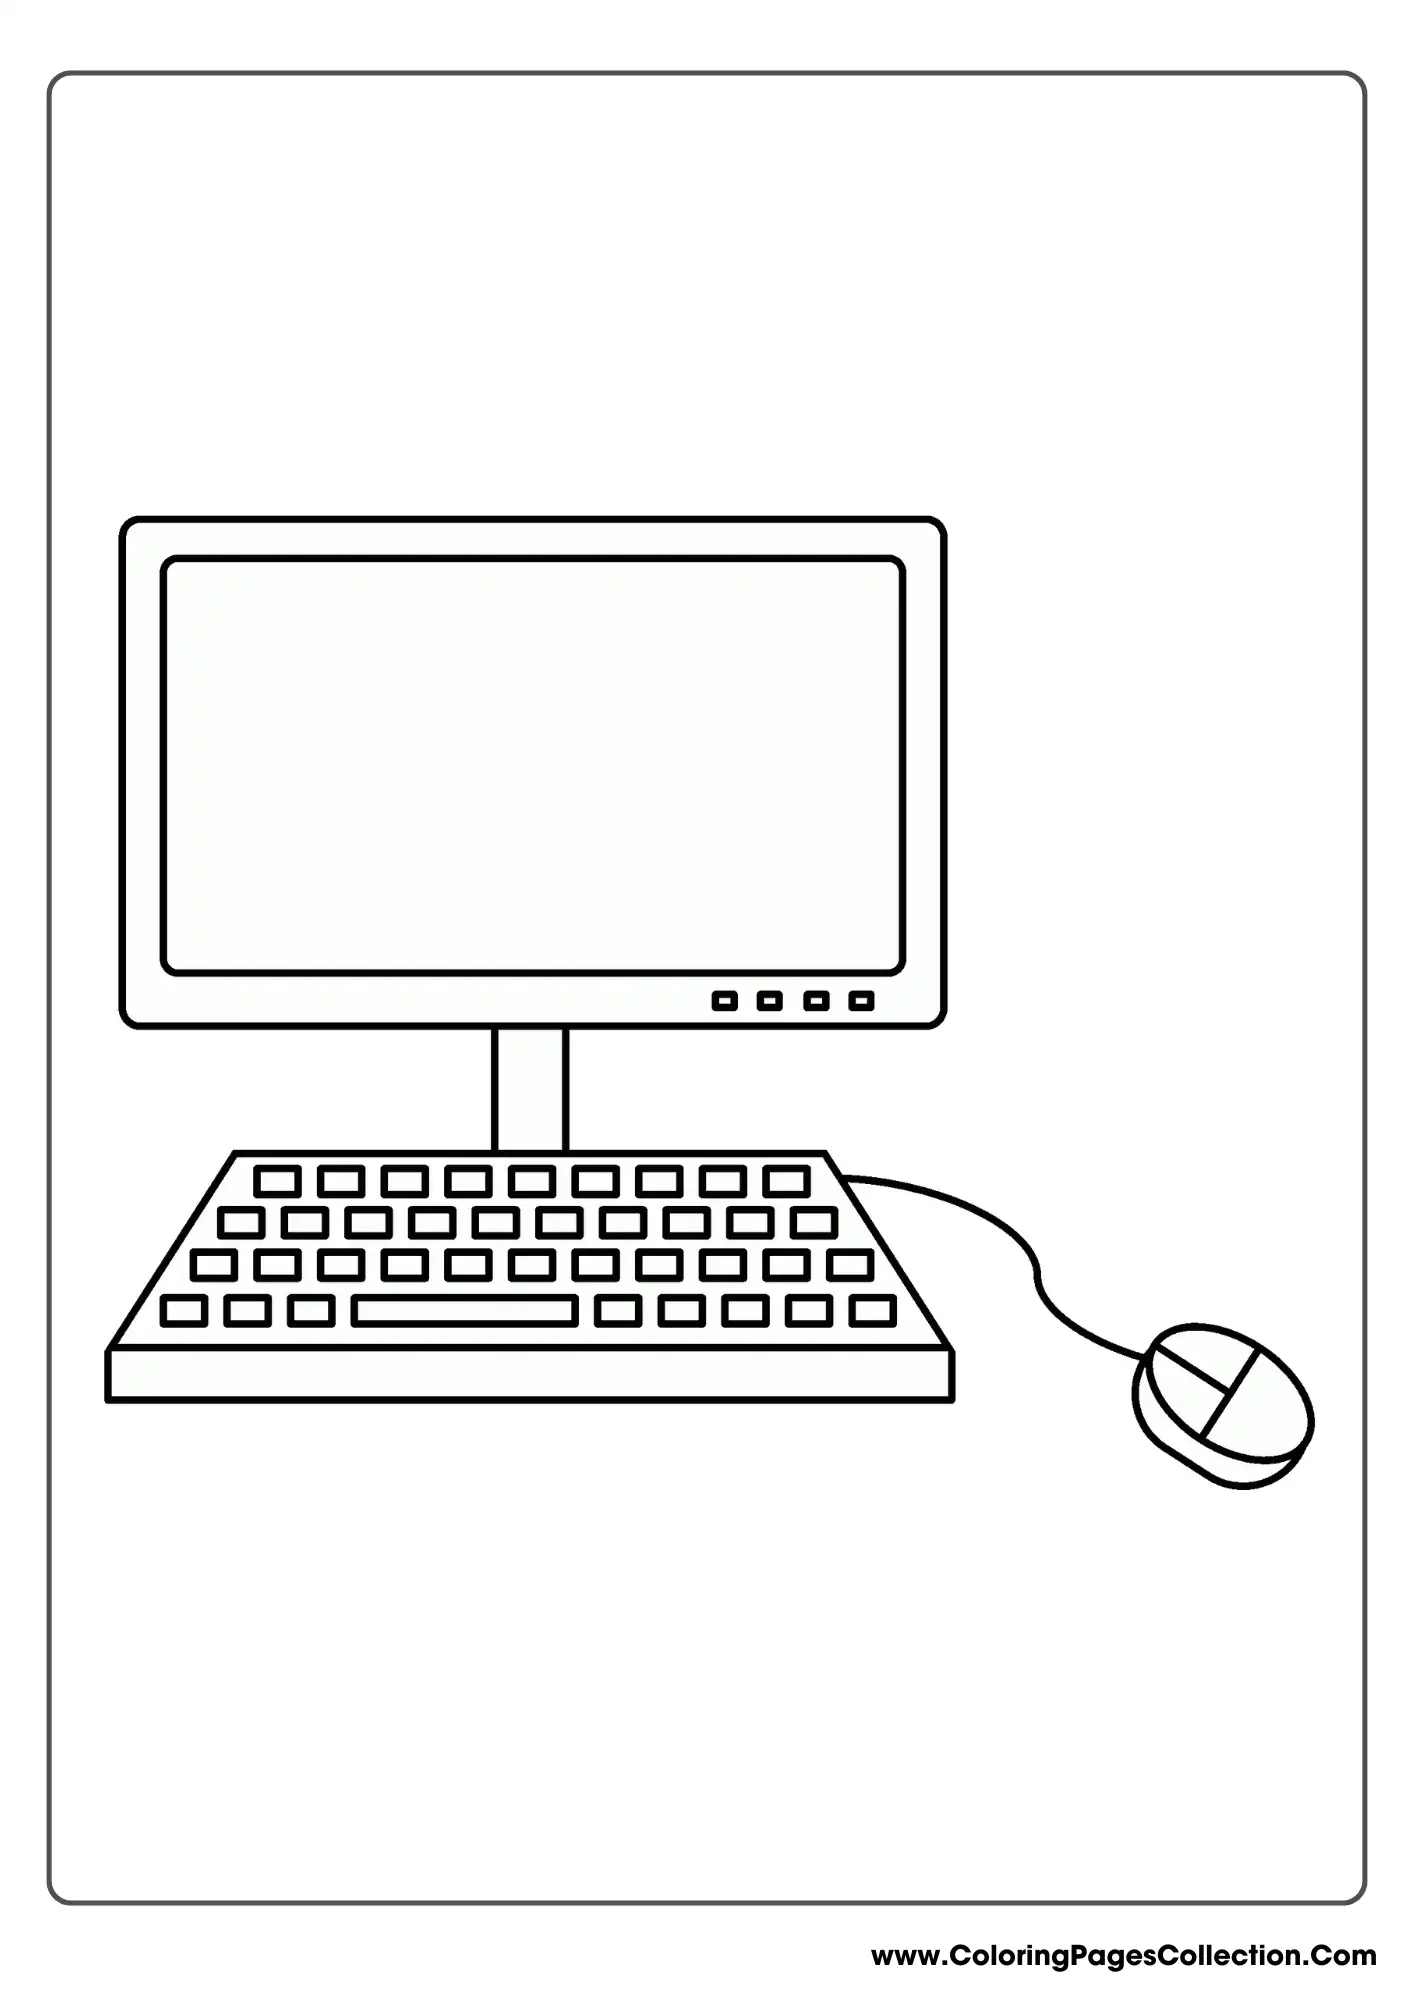 Computer coloring pages, Simple Computer Outline with Keyboard and Mouse